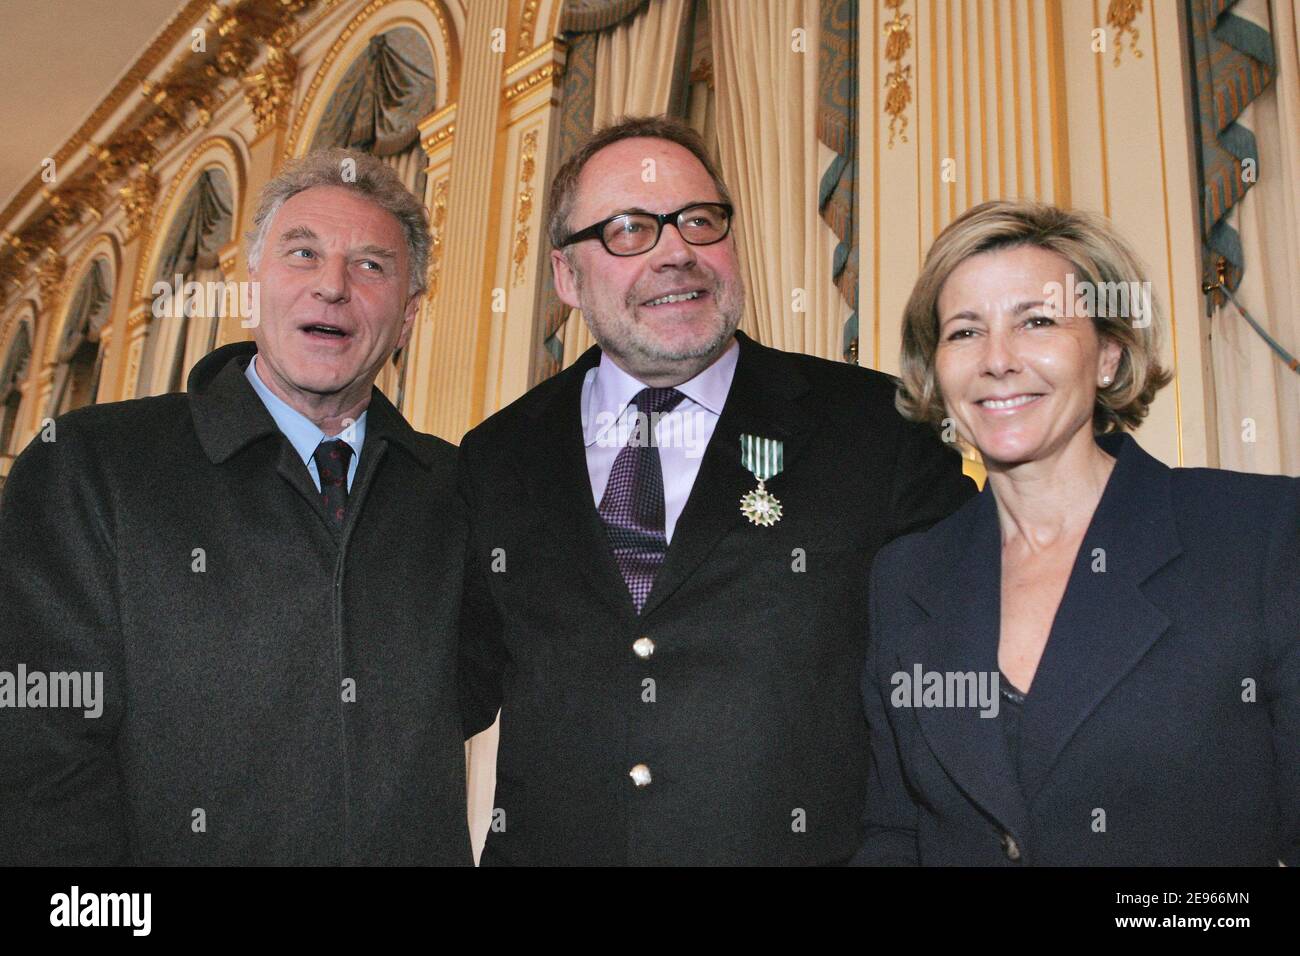 French PR Dominique Segall (c) poses with Claire Chazal and Robert Namias after receiving the 'Chevalier dans l'ordre des Arts et Lettres' medal from French culture minister Renaud Donnedieu de Vabres during a ceremony held at the ministry in Paris, France on March 17, 2006. Photo by Thierry Orban/ABACAPRESS.COM Stock Photo